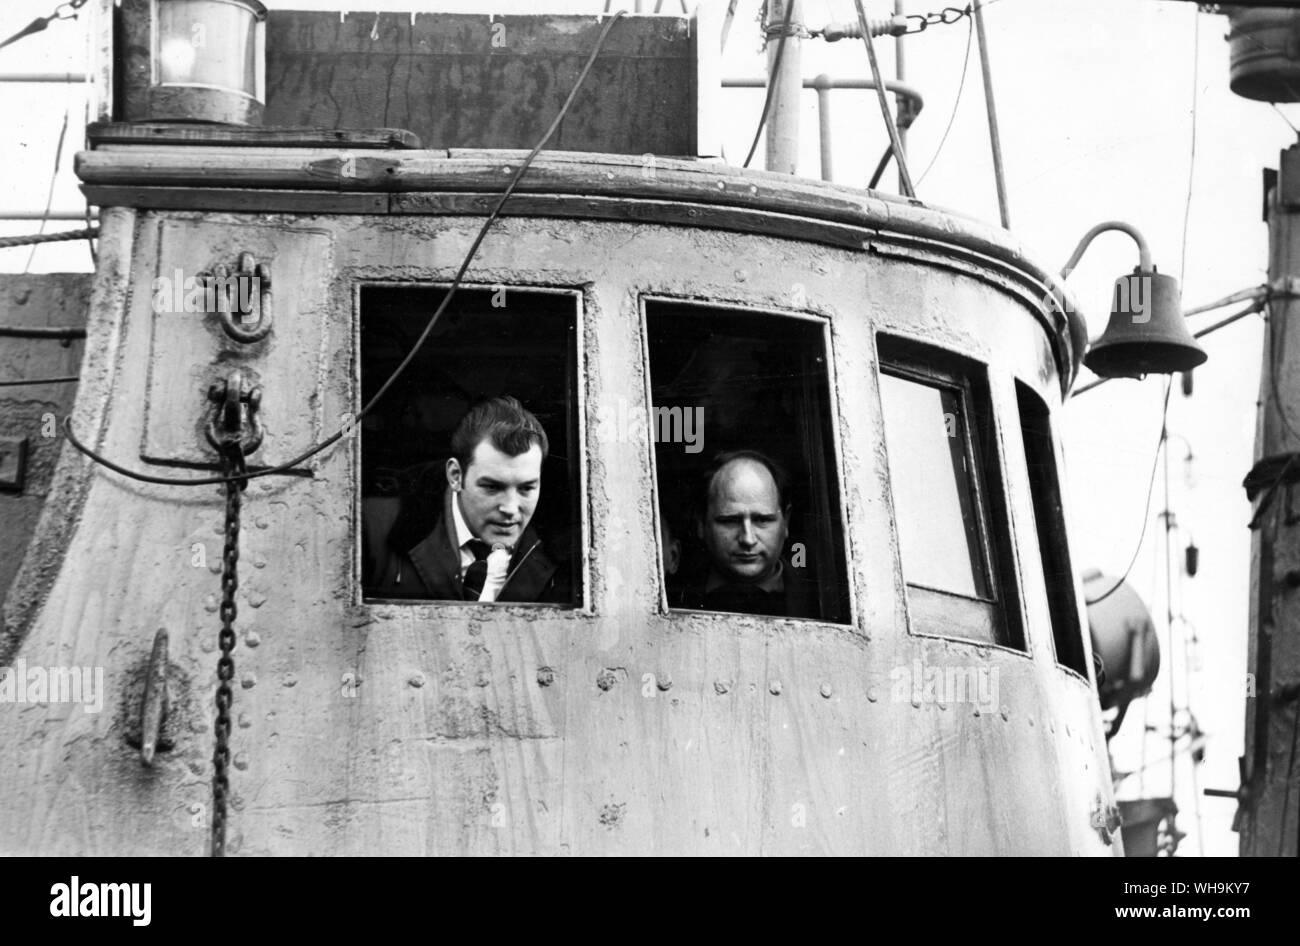 11th May 1968: Harry Edom (left) on the bridge of the trawler Ross Antares in which he sailed for Icelandic waters yesterday. He was the sole survivor of the ill-fated Ross Cleveland three in February 1968. Stock Photo